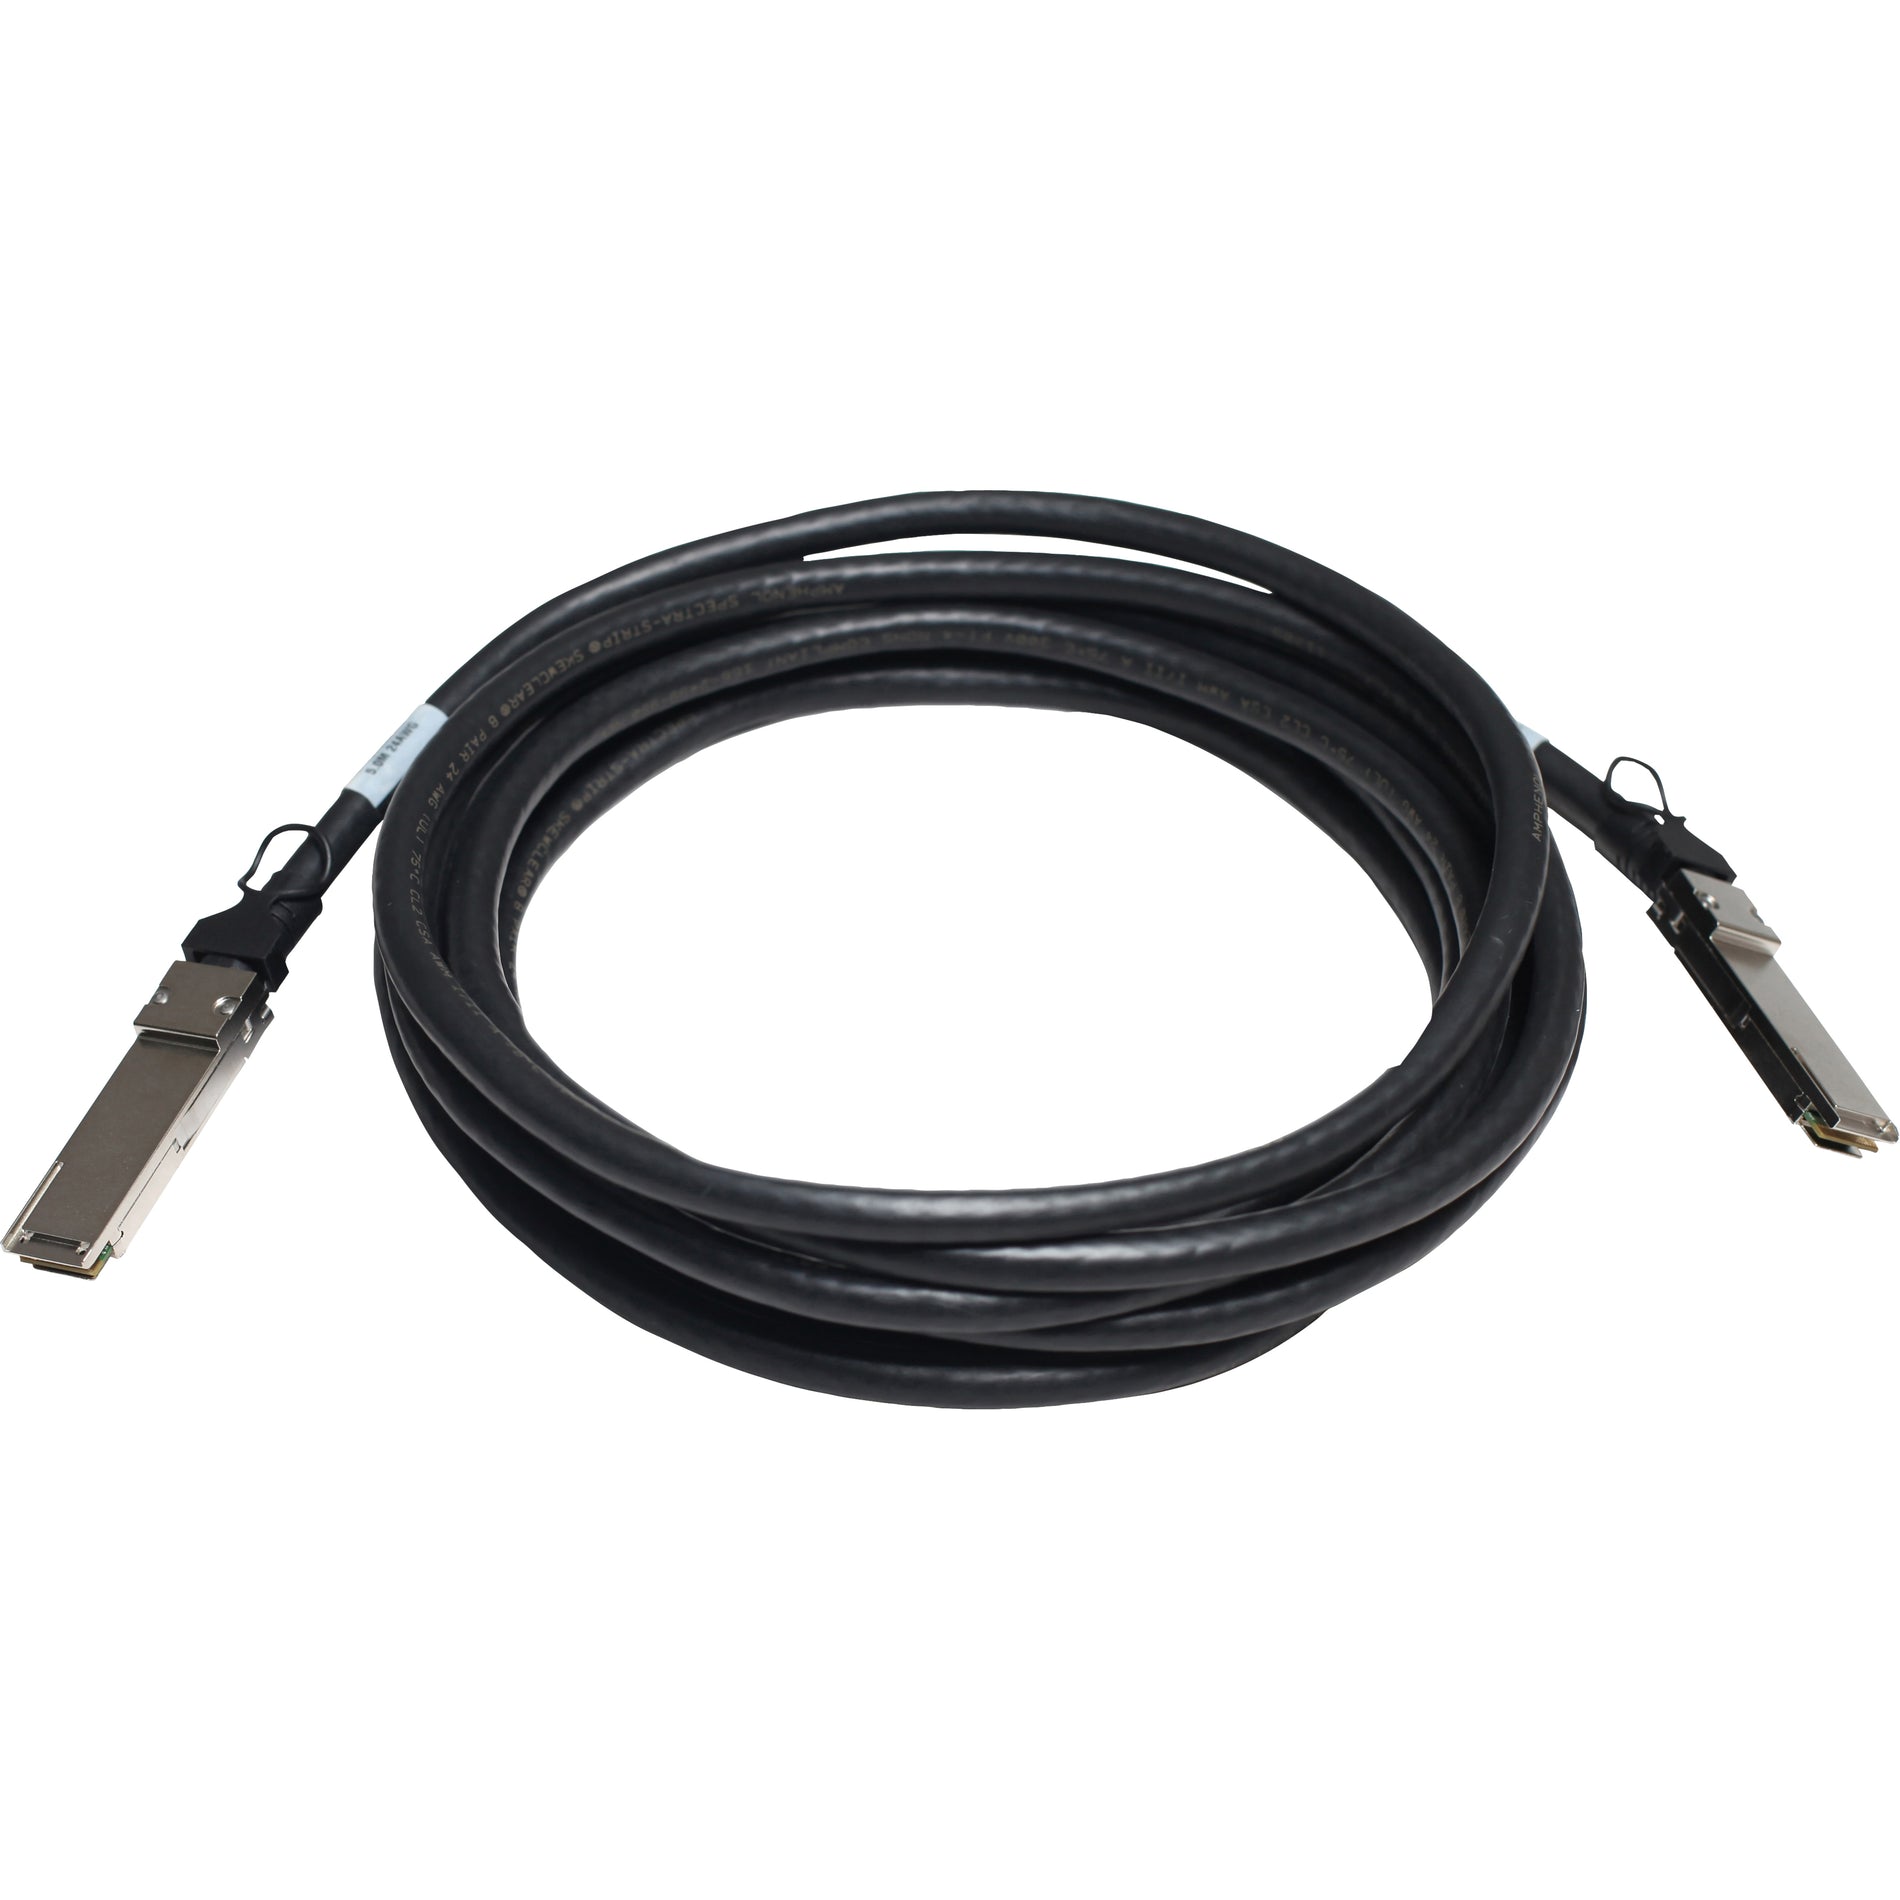 HPE E Infiniband Splitter Network Cable (JG329A)